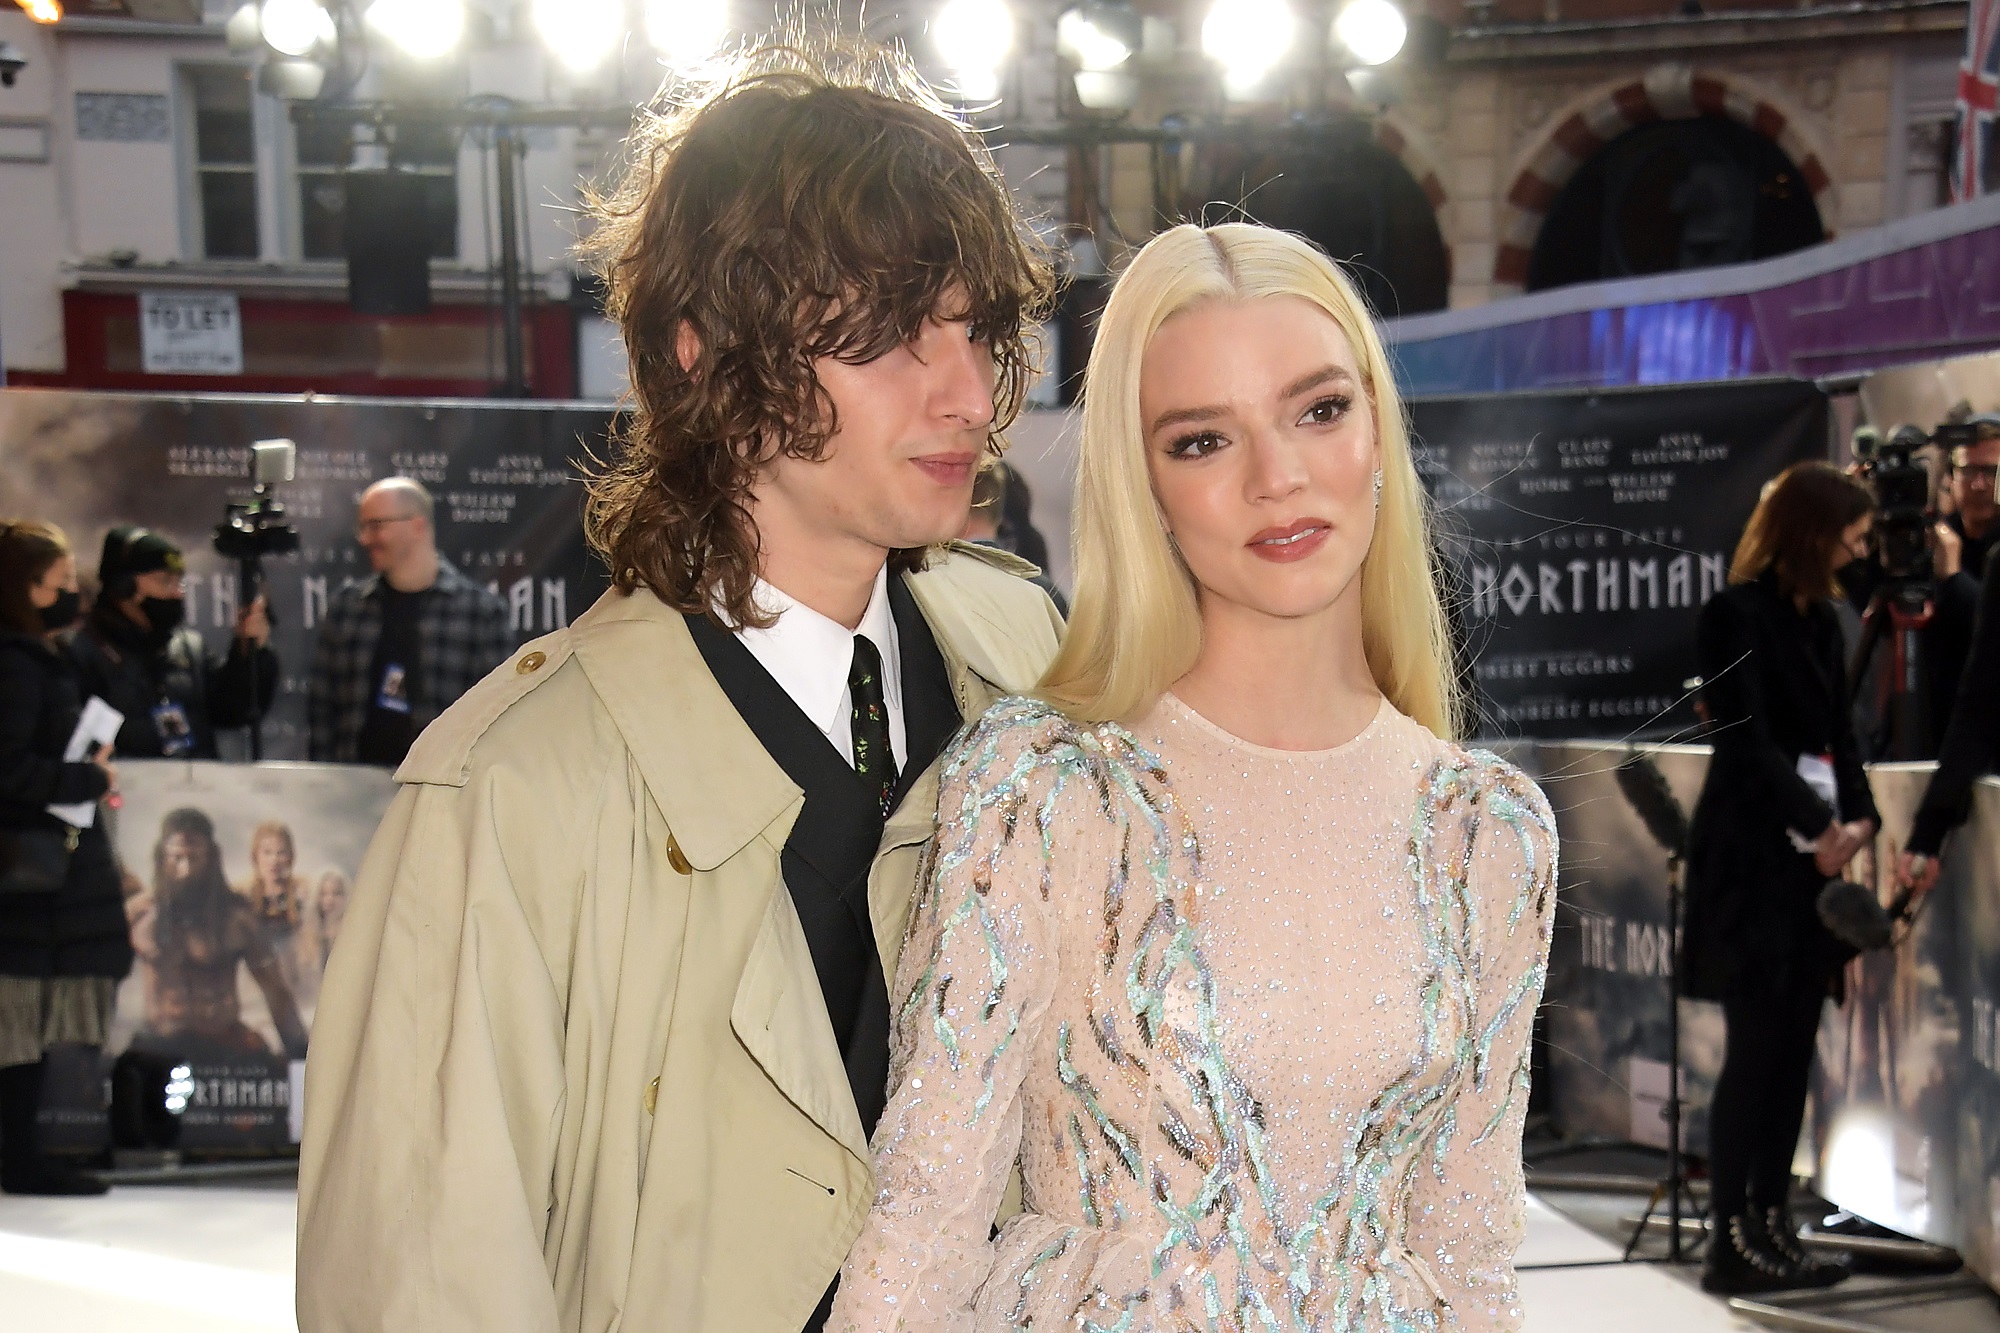 Anya Taylor-Joy and boyfriend marry in 'intimate courthouse